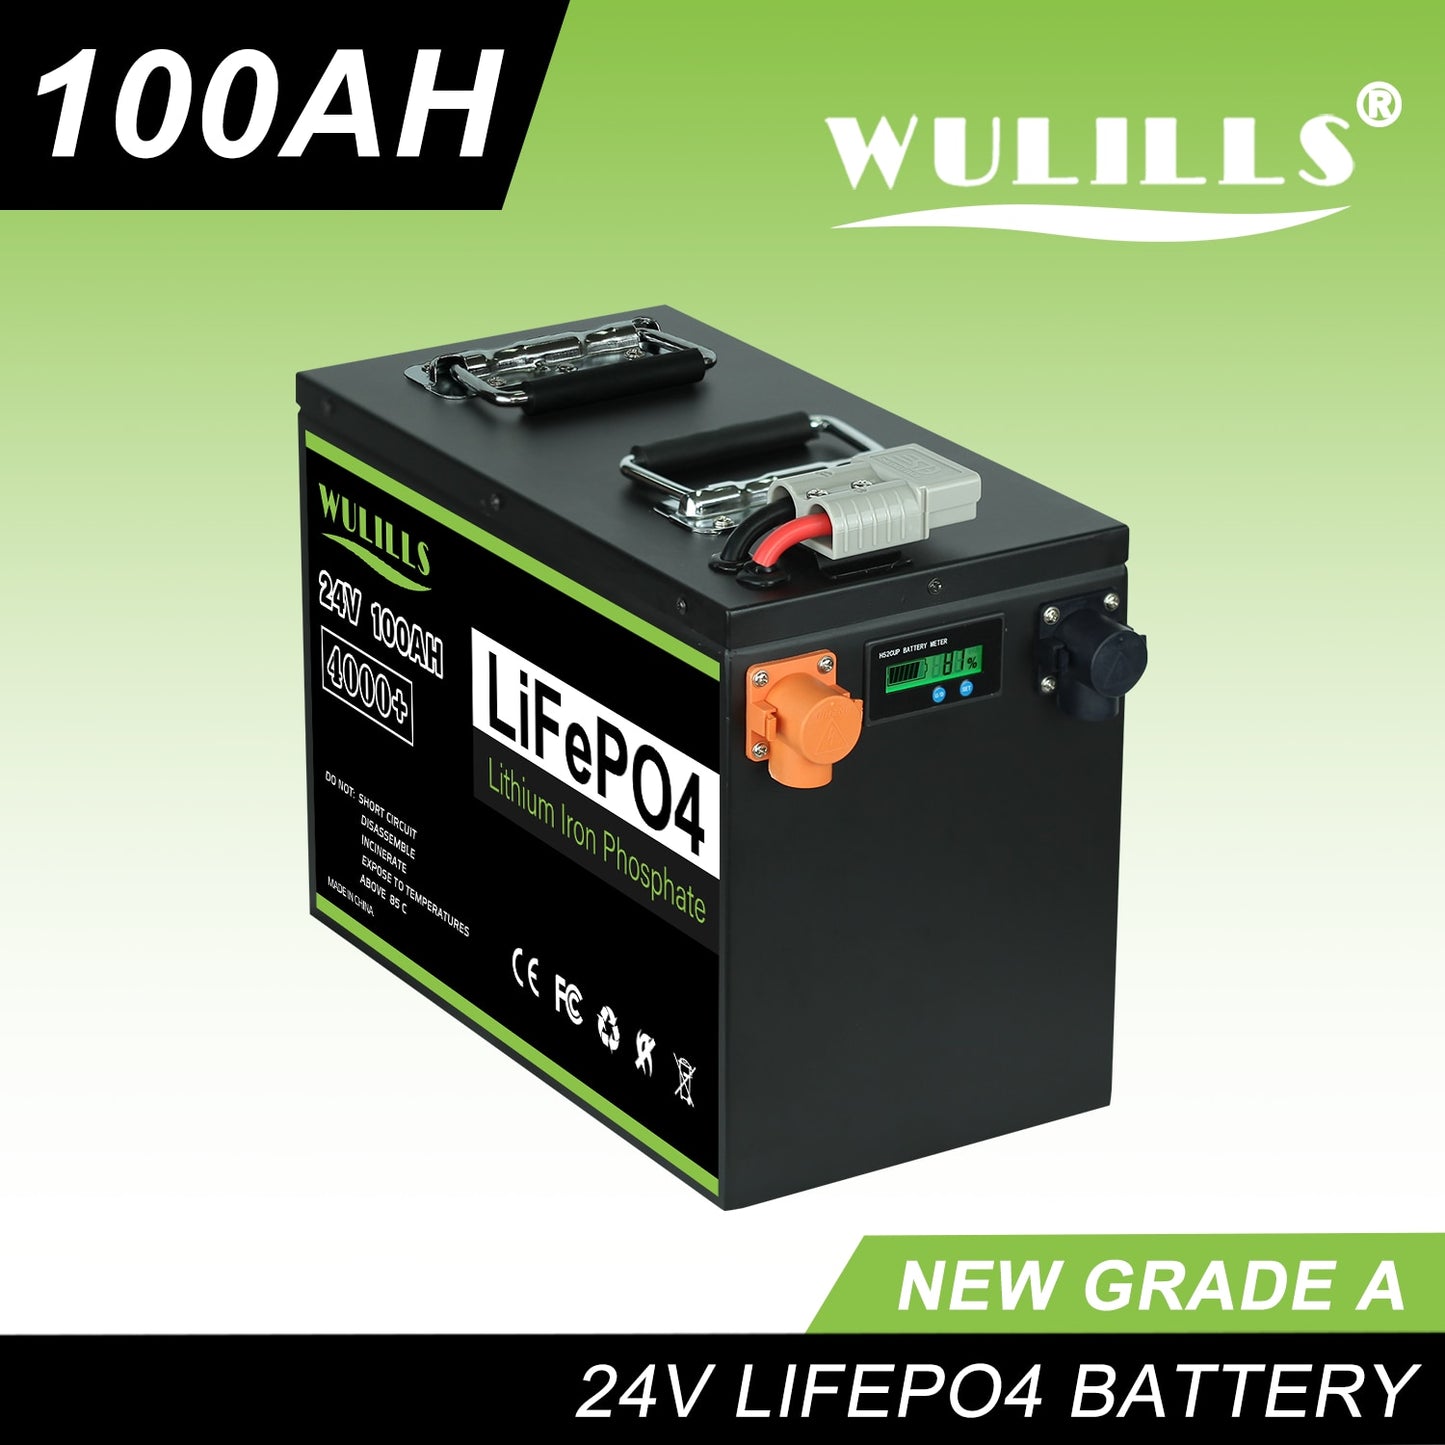 New 12V 24V 48V 100Ah 200Ah 280Ah 400Ah LiFePo4 Battery Pack Built-in BMS Lithium Iron Phosphate Battery For Solar Boat no Tax